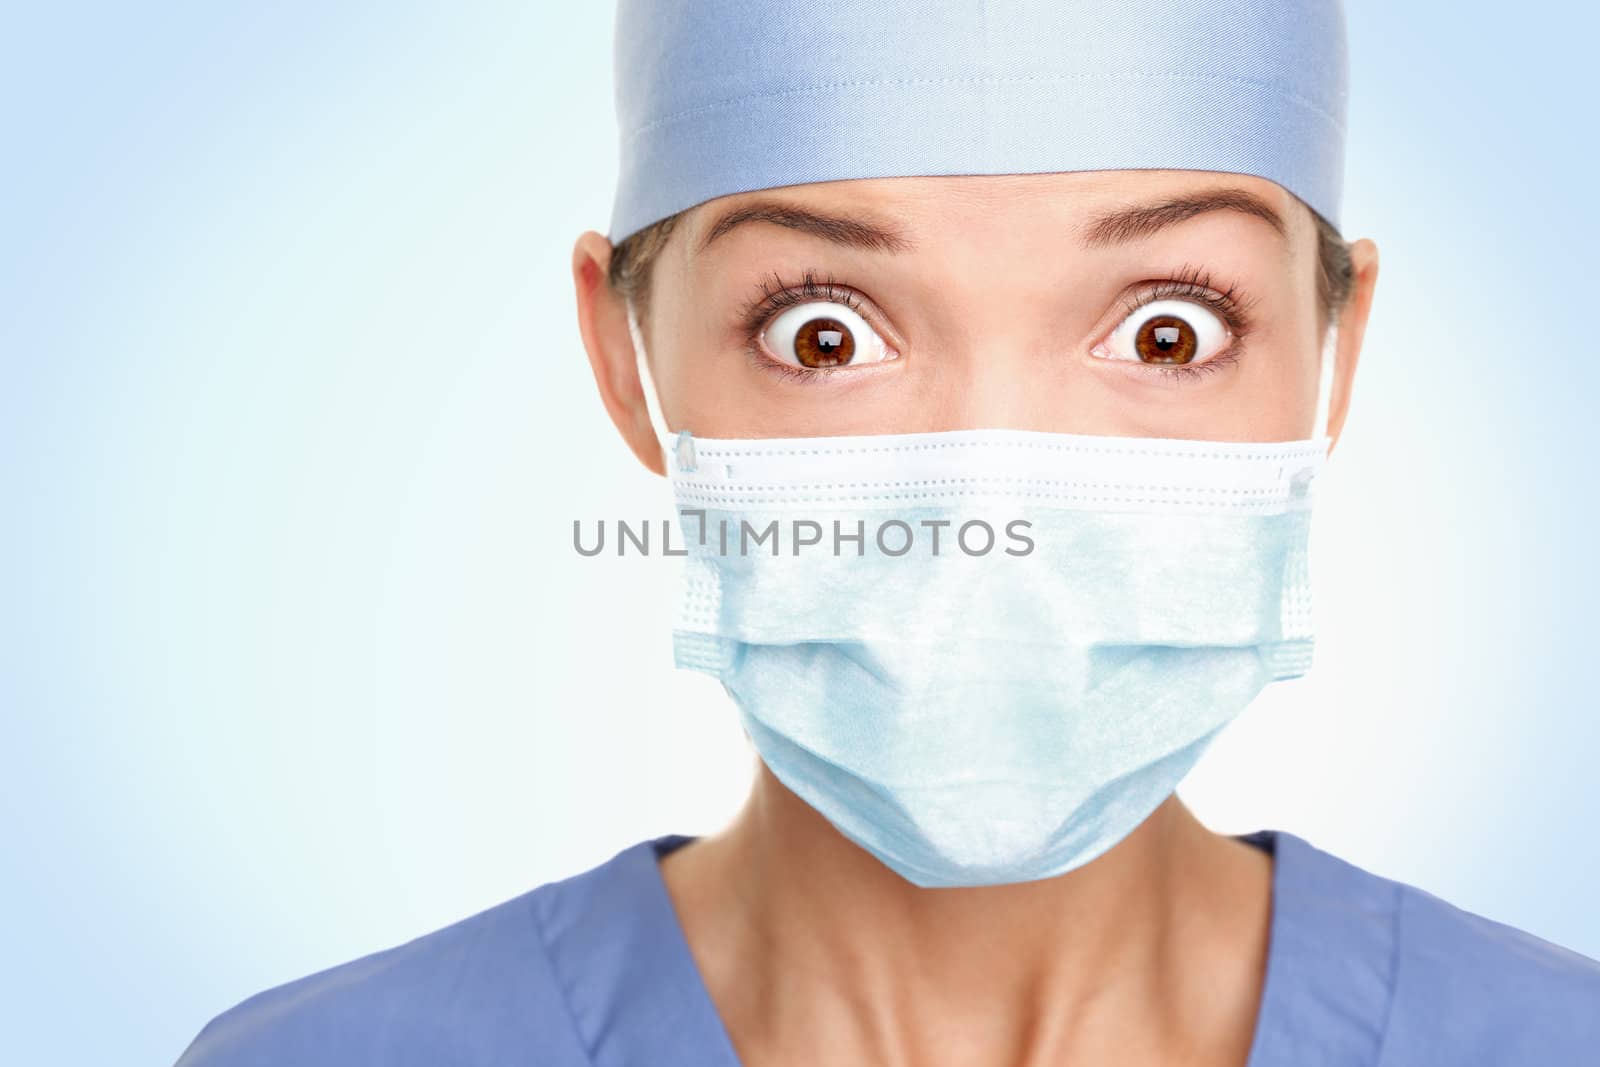 Doctor / surgeon shocked - funny. Woman closeup portrait of young doctor, surgeon or nurse surprised starring with big eyes wearing surgical mask. Asian / Caucasian female model. 